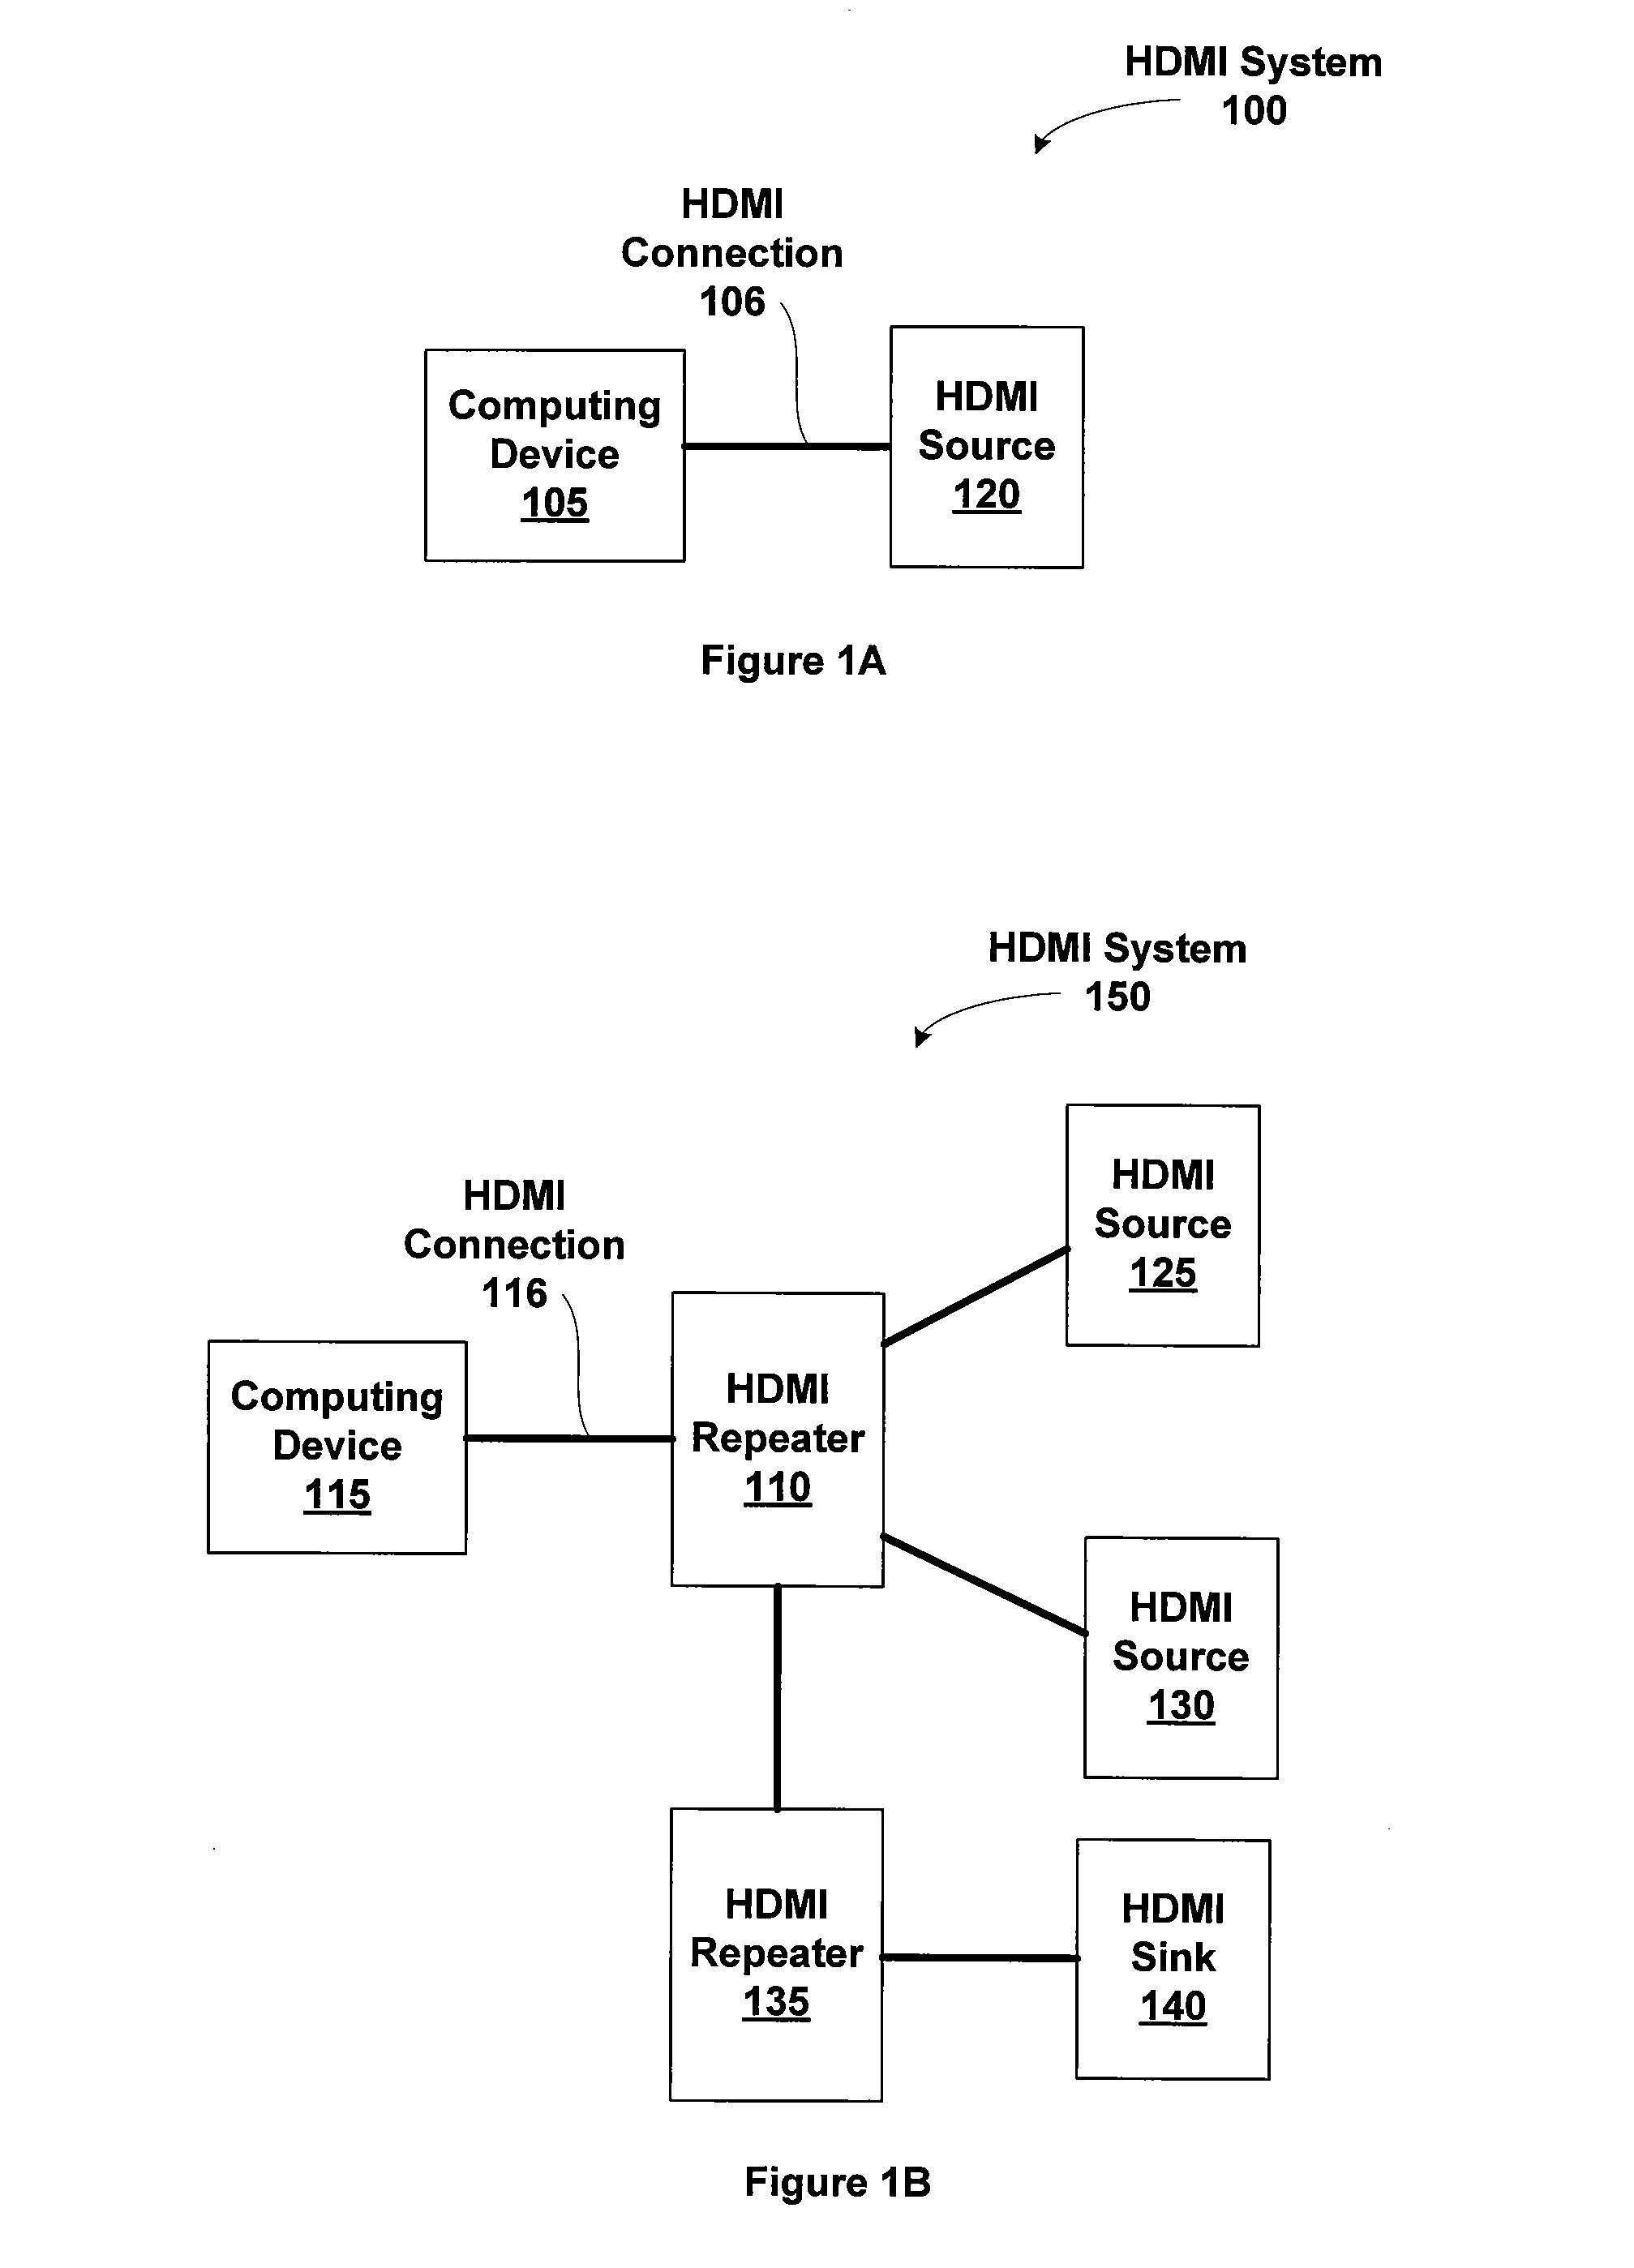 HDMI Network Control of A Media Center Computing Device